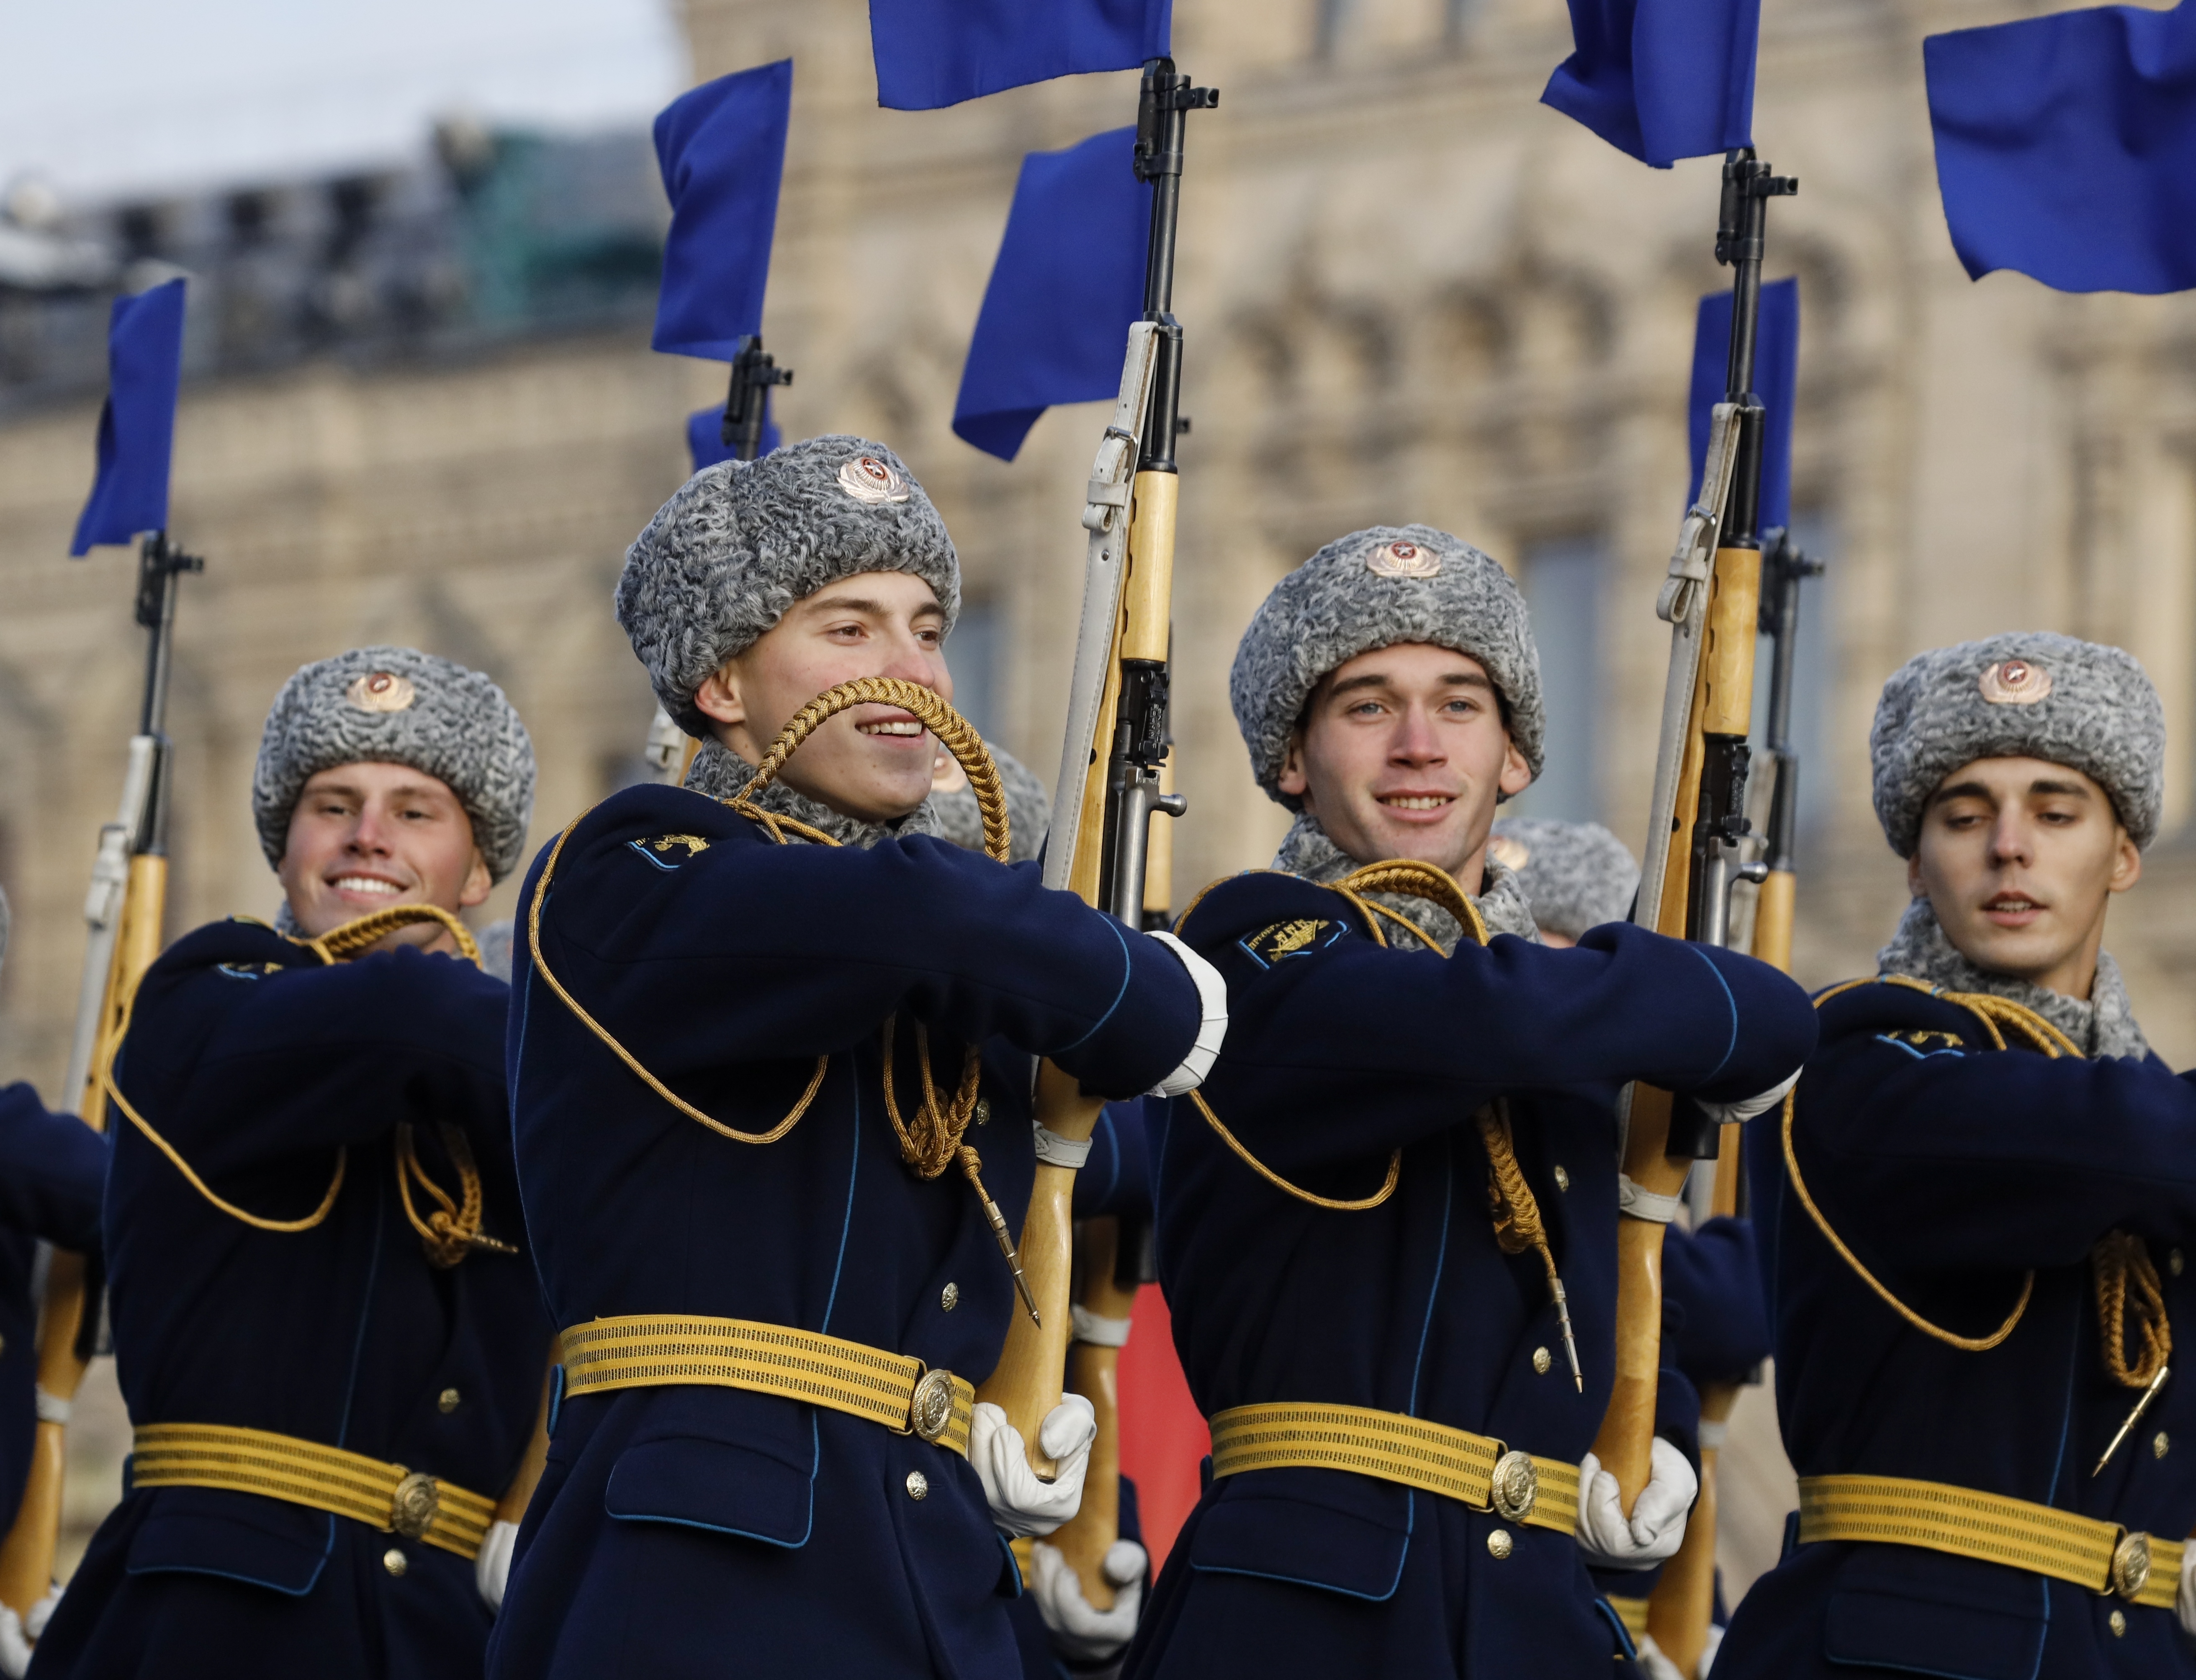 Russian soldiers march during the Nov. 7 parade in Red Square, in Moscow, Russia, Wednesday, Nov. 7, 2018. The event marked the 77th anniversary of a World War II historic parade in Red Square and honored the participants in the Nov. 7, 1941 parade who headed directly to the front lines to defend Moscow from the Nazi forces. (AP Photo/Alexander Zemlianichenko)